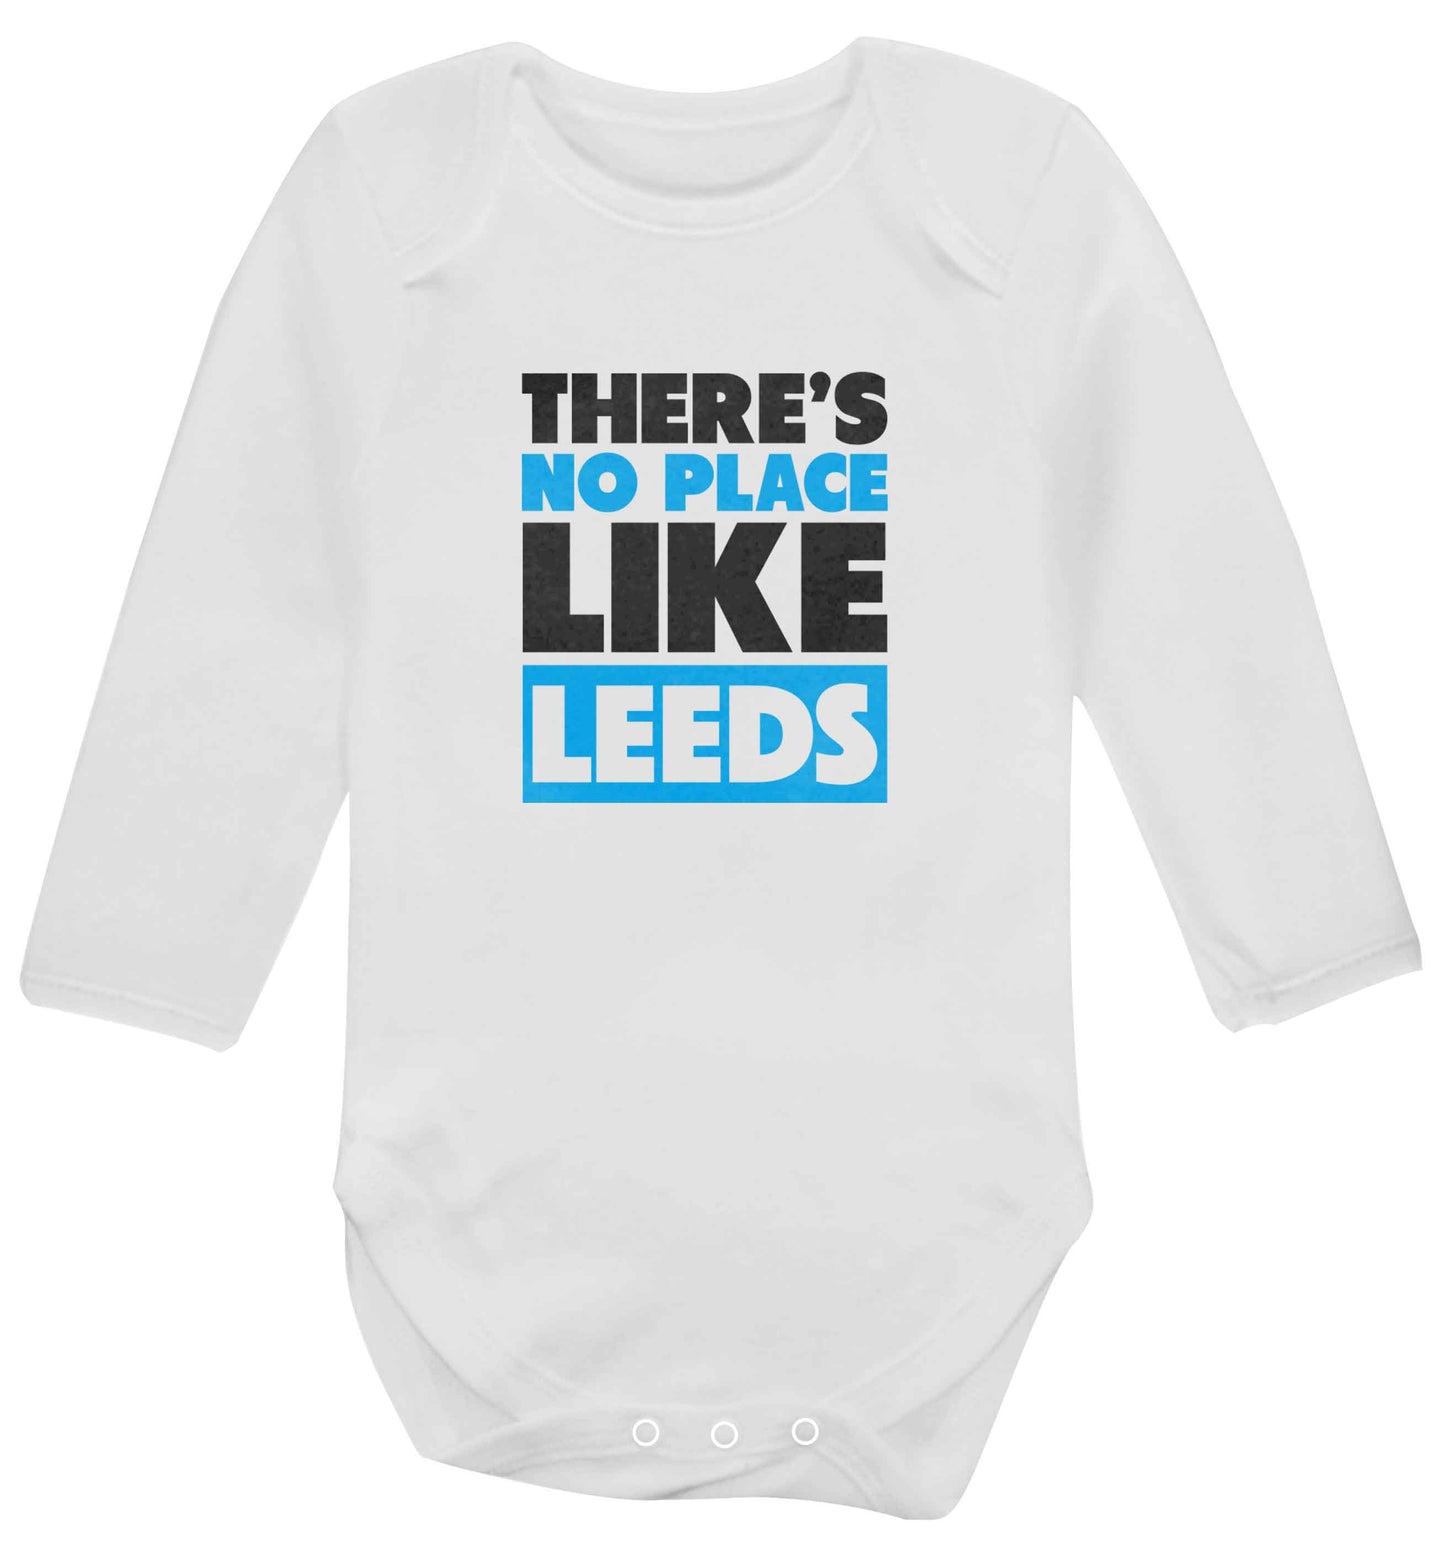 There's no place like Leeds baby vest long sleeved white 6-12 months